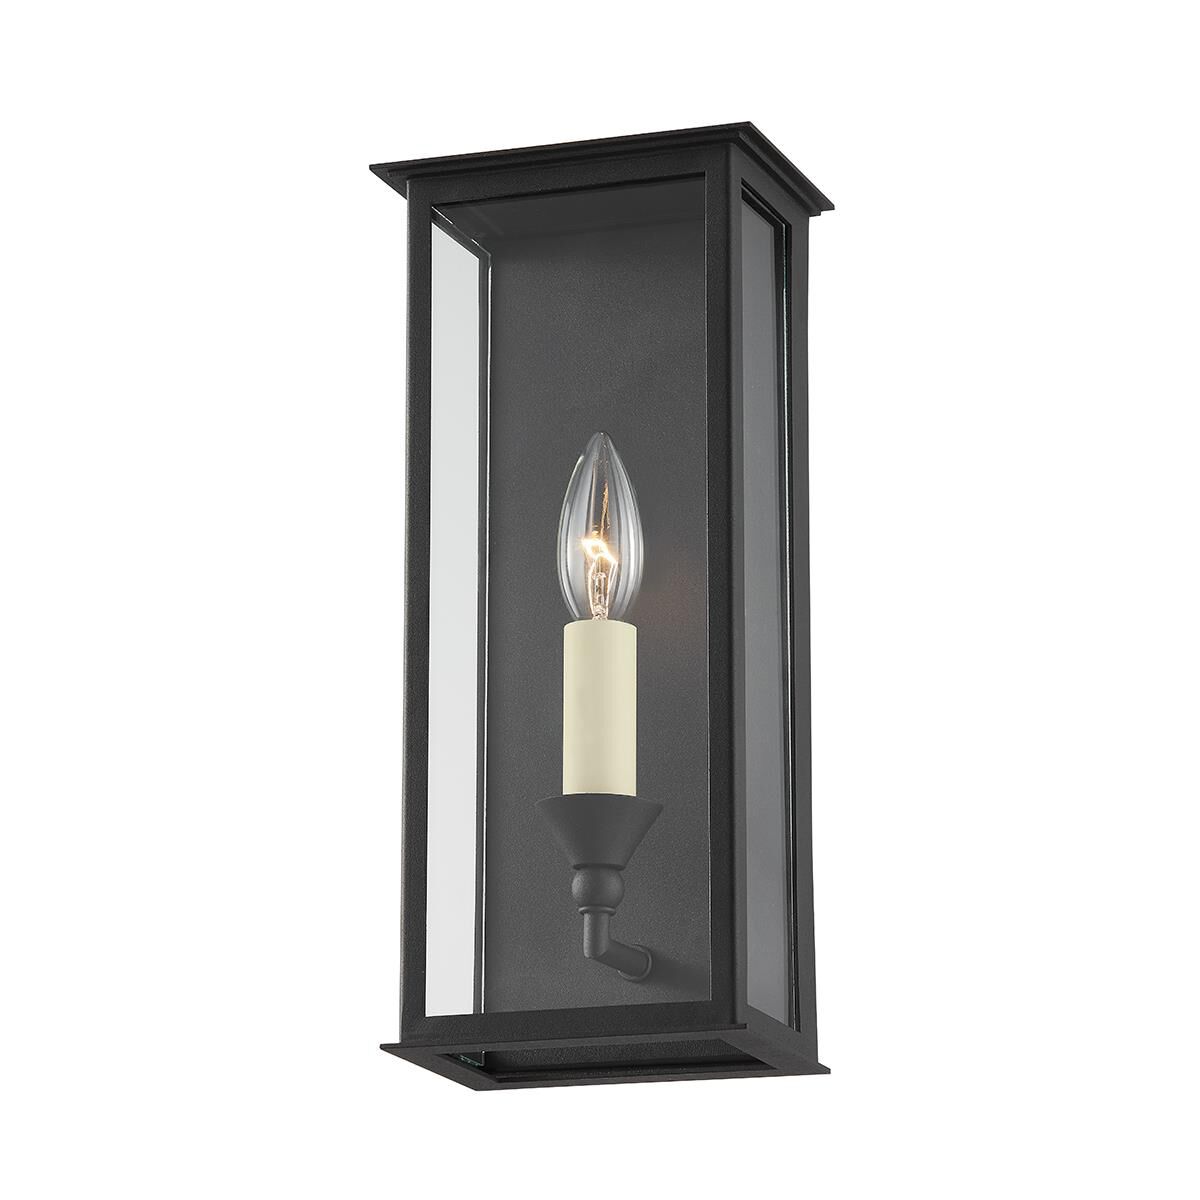 Photos - Chandelier / Lamp Troy Lighting Chauncey 6 Inch Outdoor Wall Light Chauncey - B6991-TBK - Tr